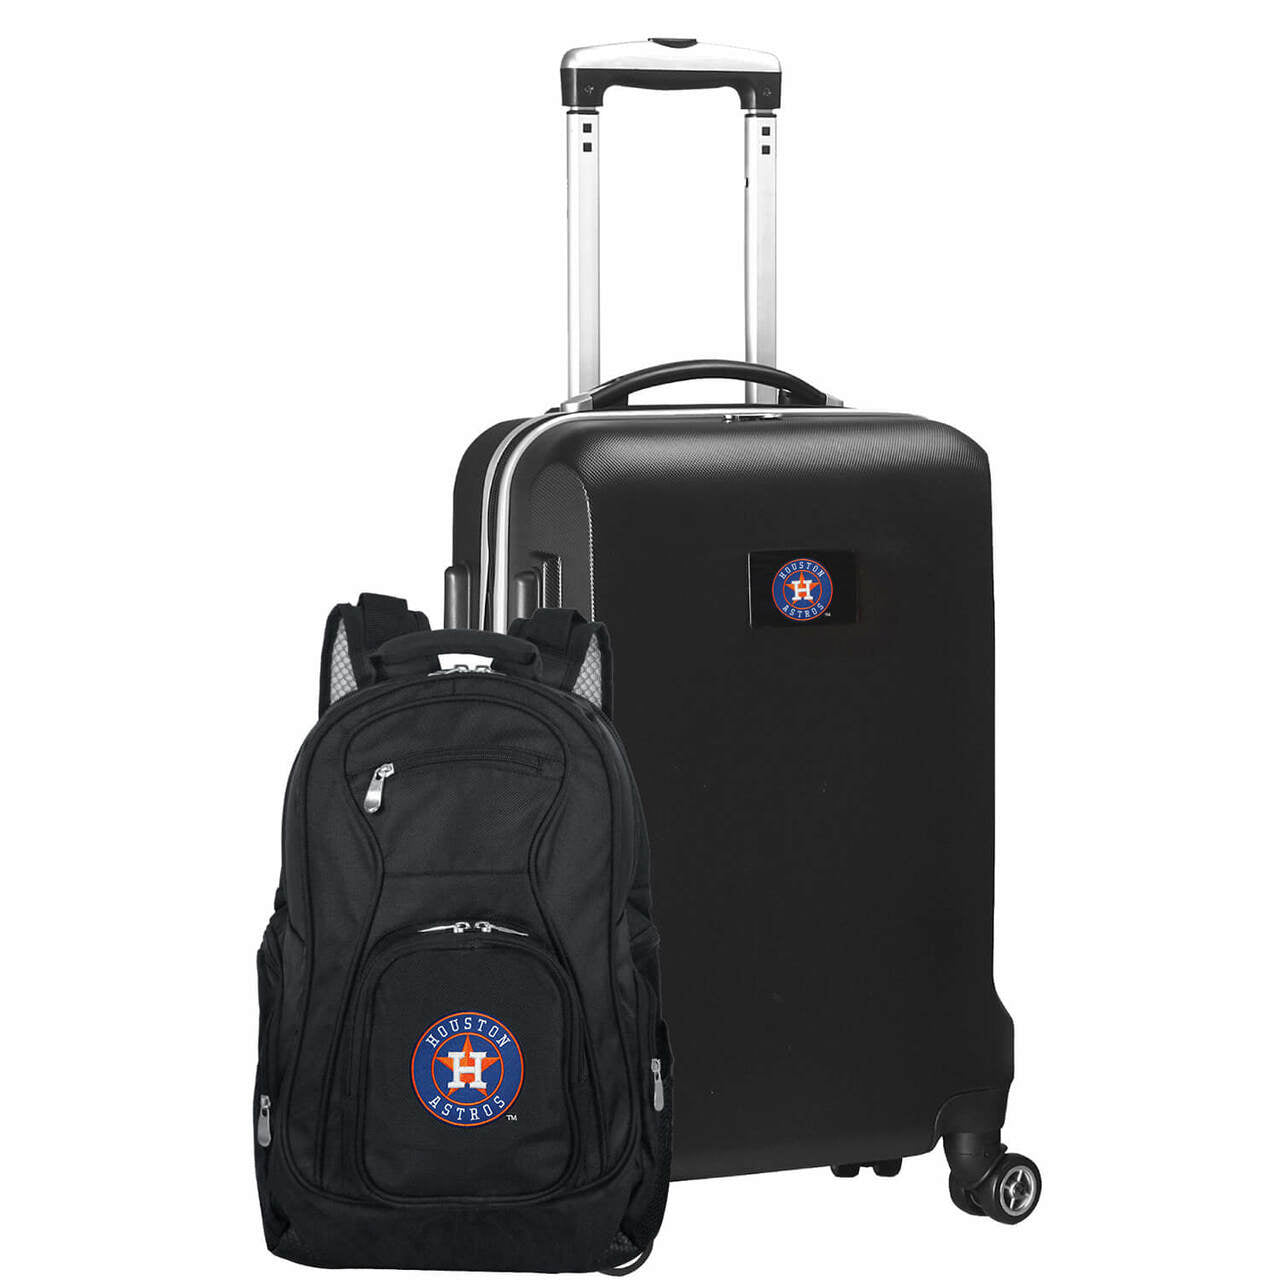 Houston Astros Deluxe 2-Piece Backpack and Carry on Set in Black